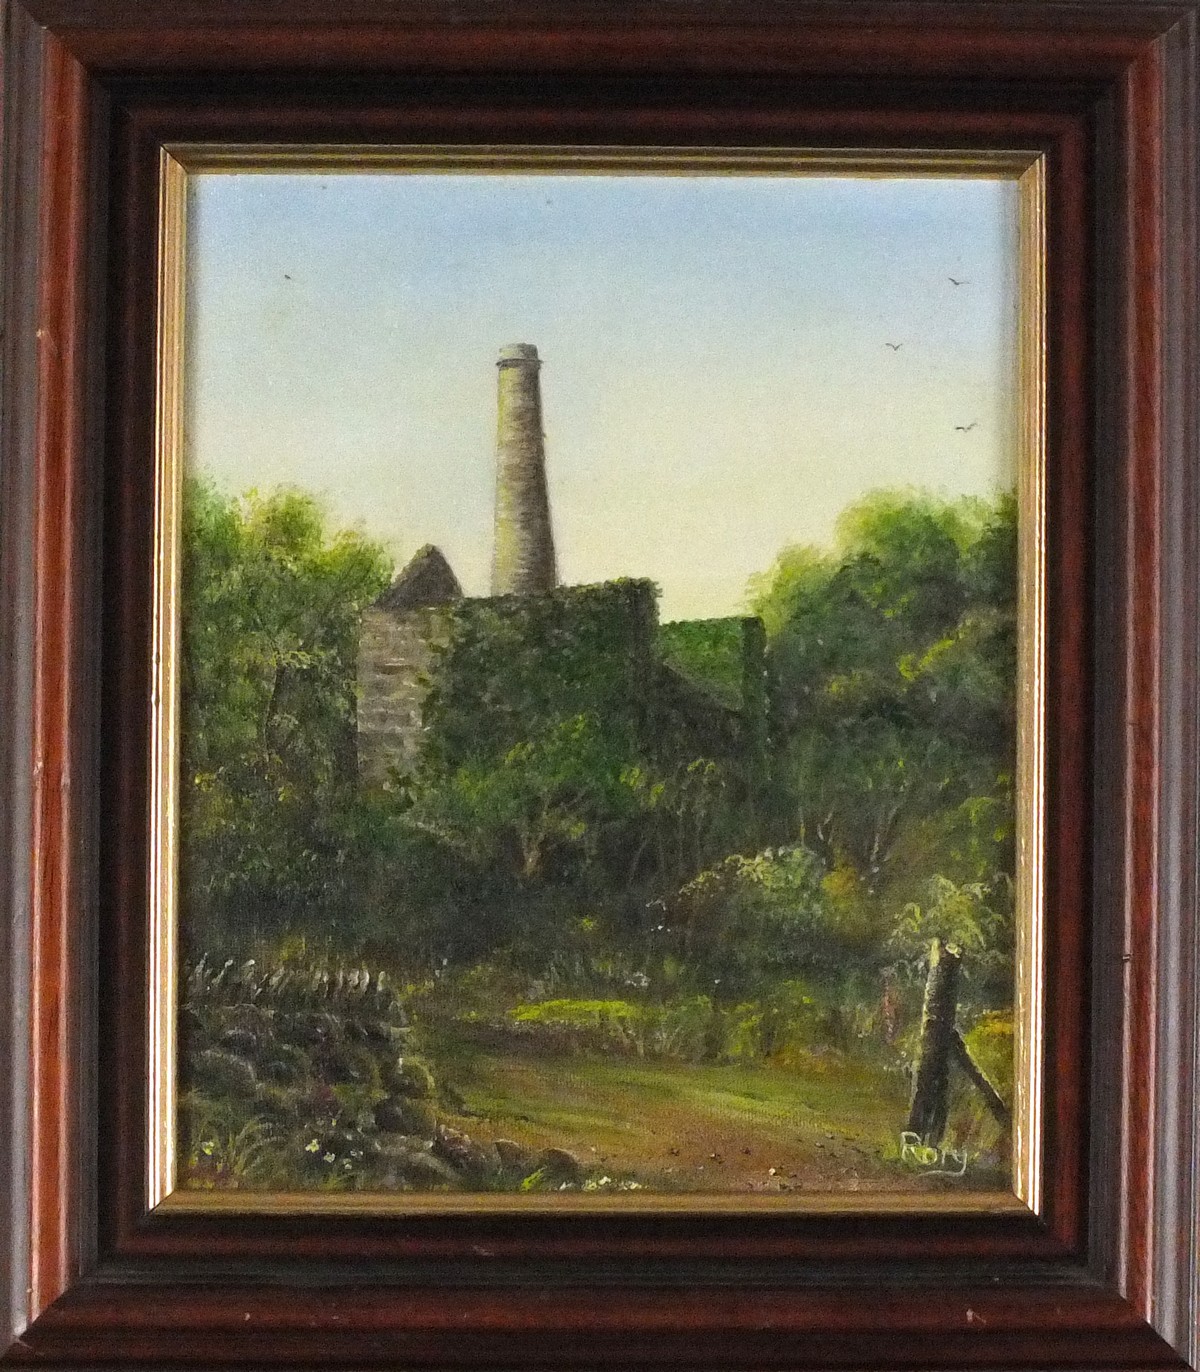 RORY (British 20th Century) FIveway Polgooth, Oil on canvas, Signed lower right, titled verso, 9. - Bild 2 aus 2